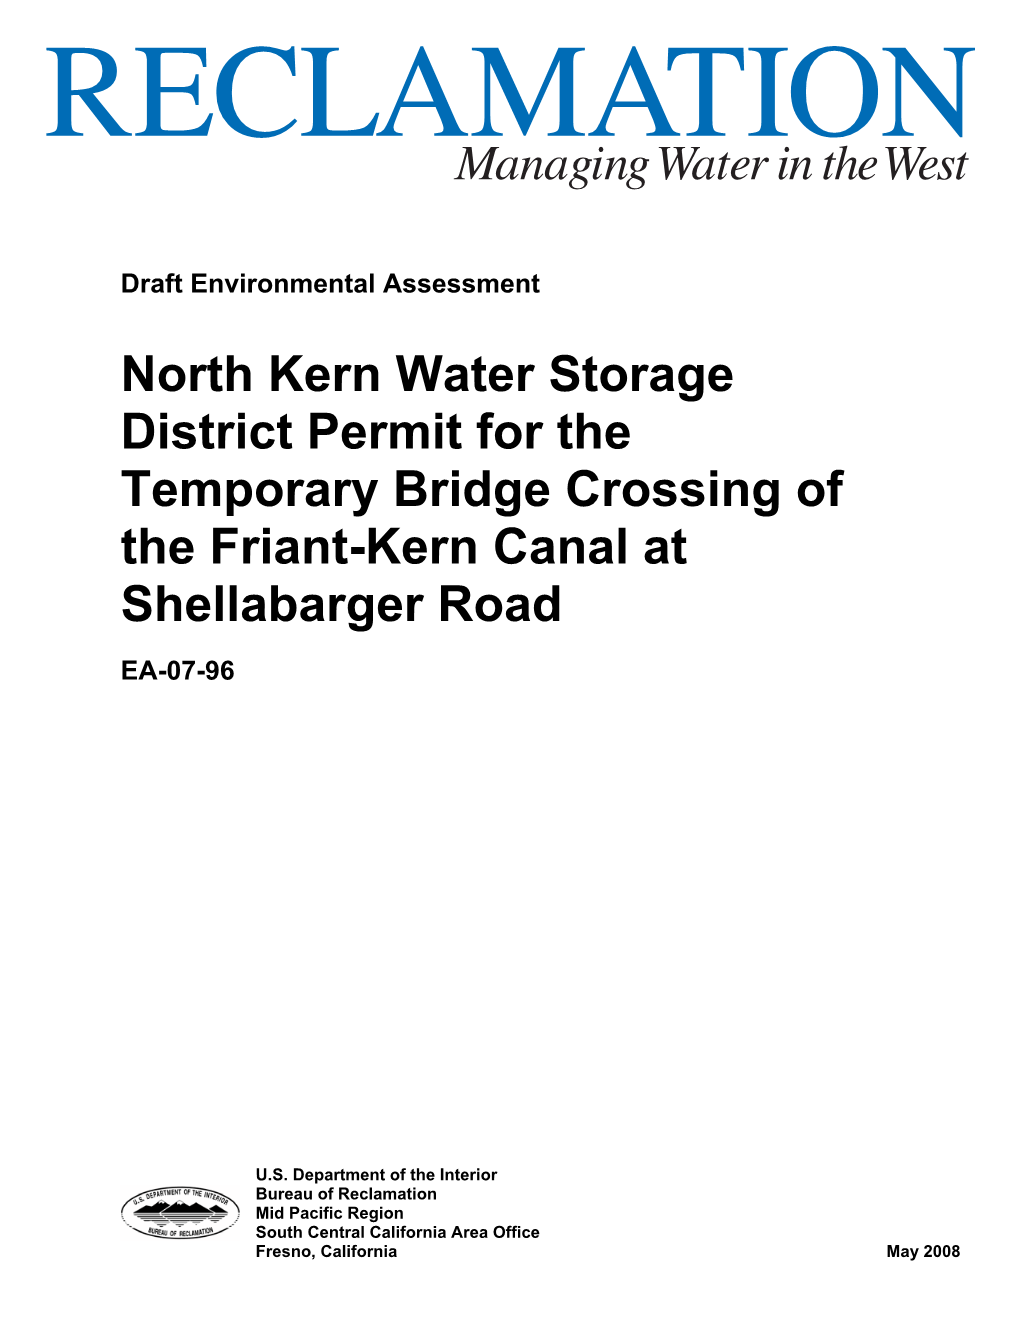 North Kern Water Storage District Permit for the Temporary Bridge Crossing of the Friant-Kern Canal at Shellabarger Road